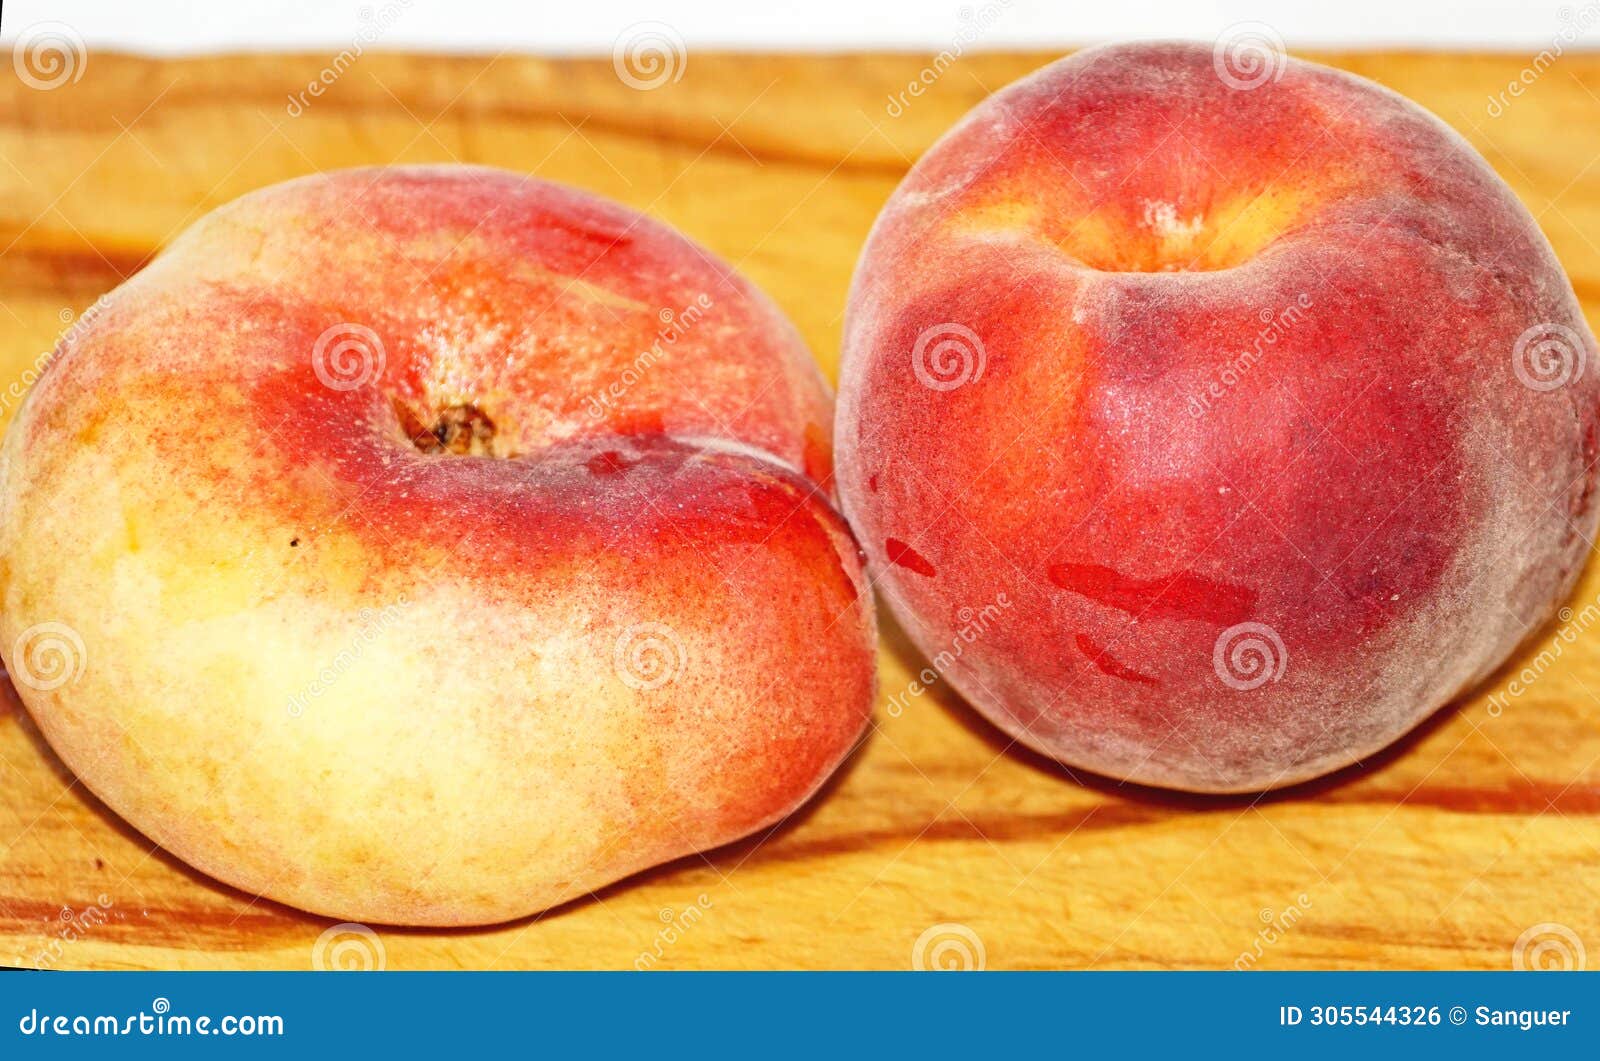 peach and paraguayan on a cutting board in the kitchen